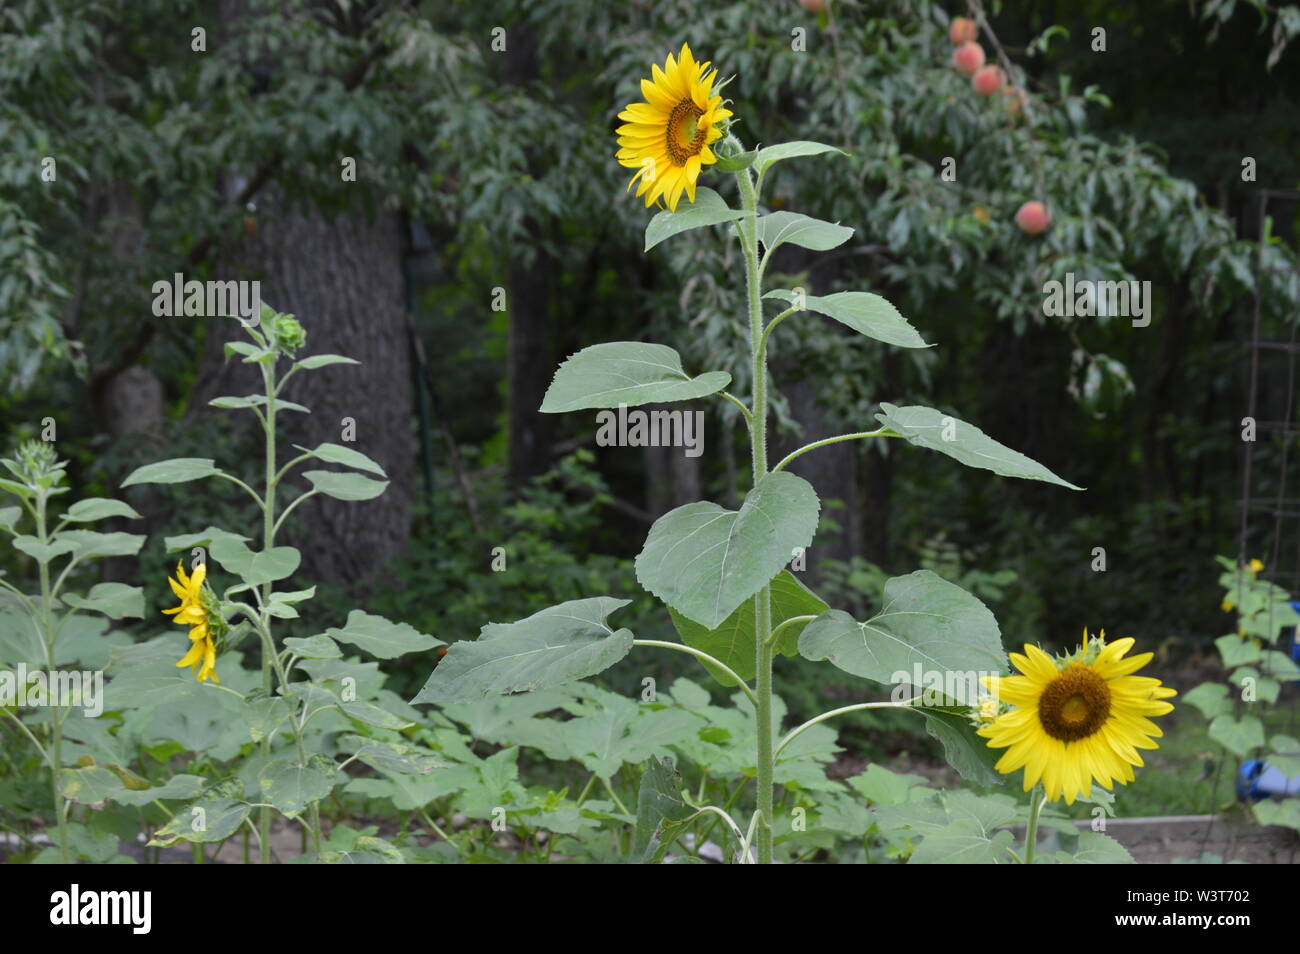 Yellow sunflowers in a garden Stock Photo